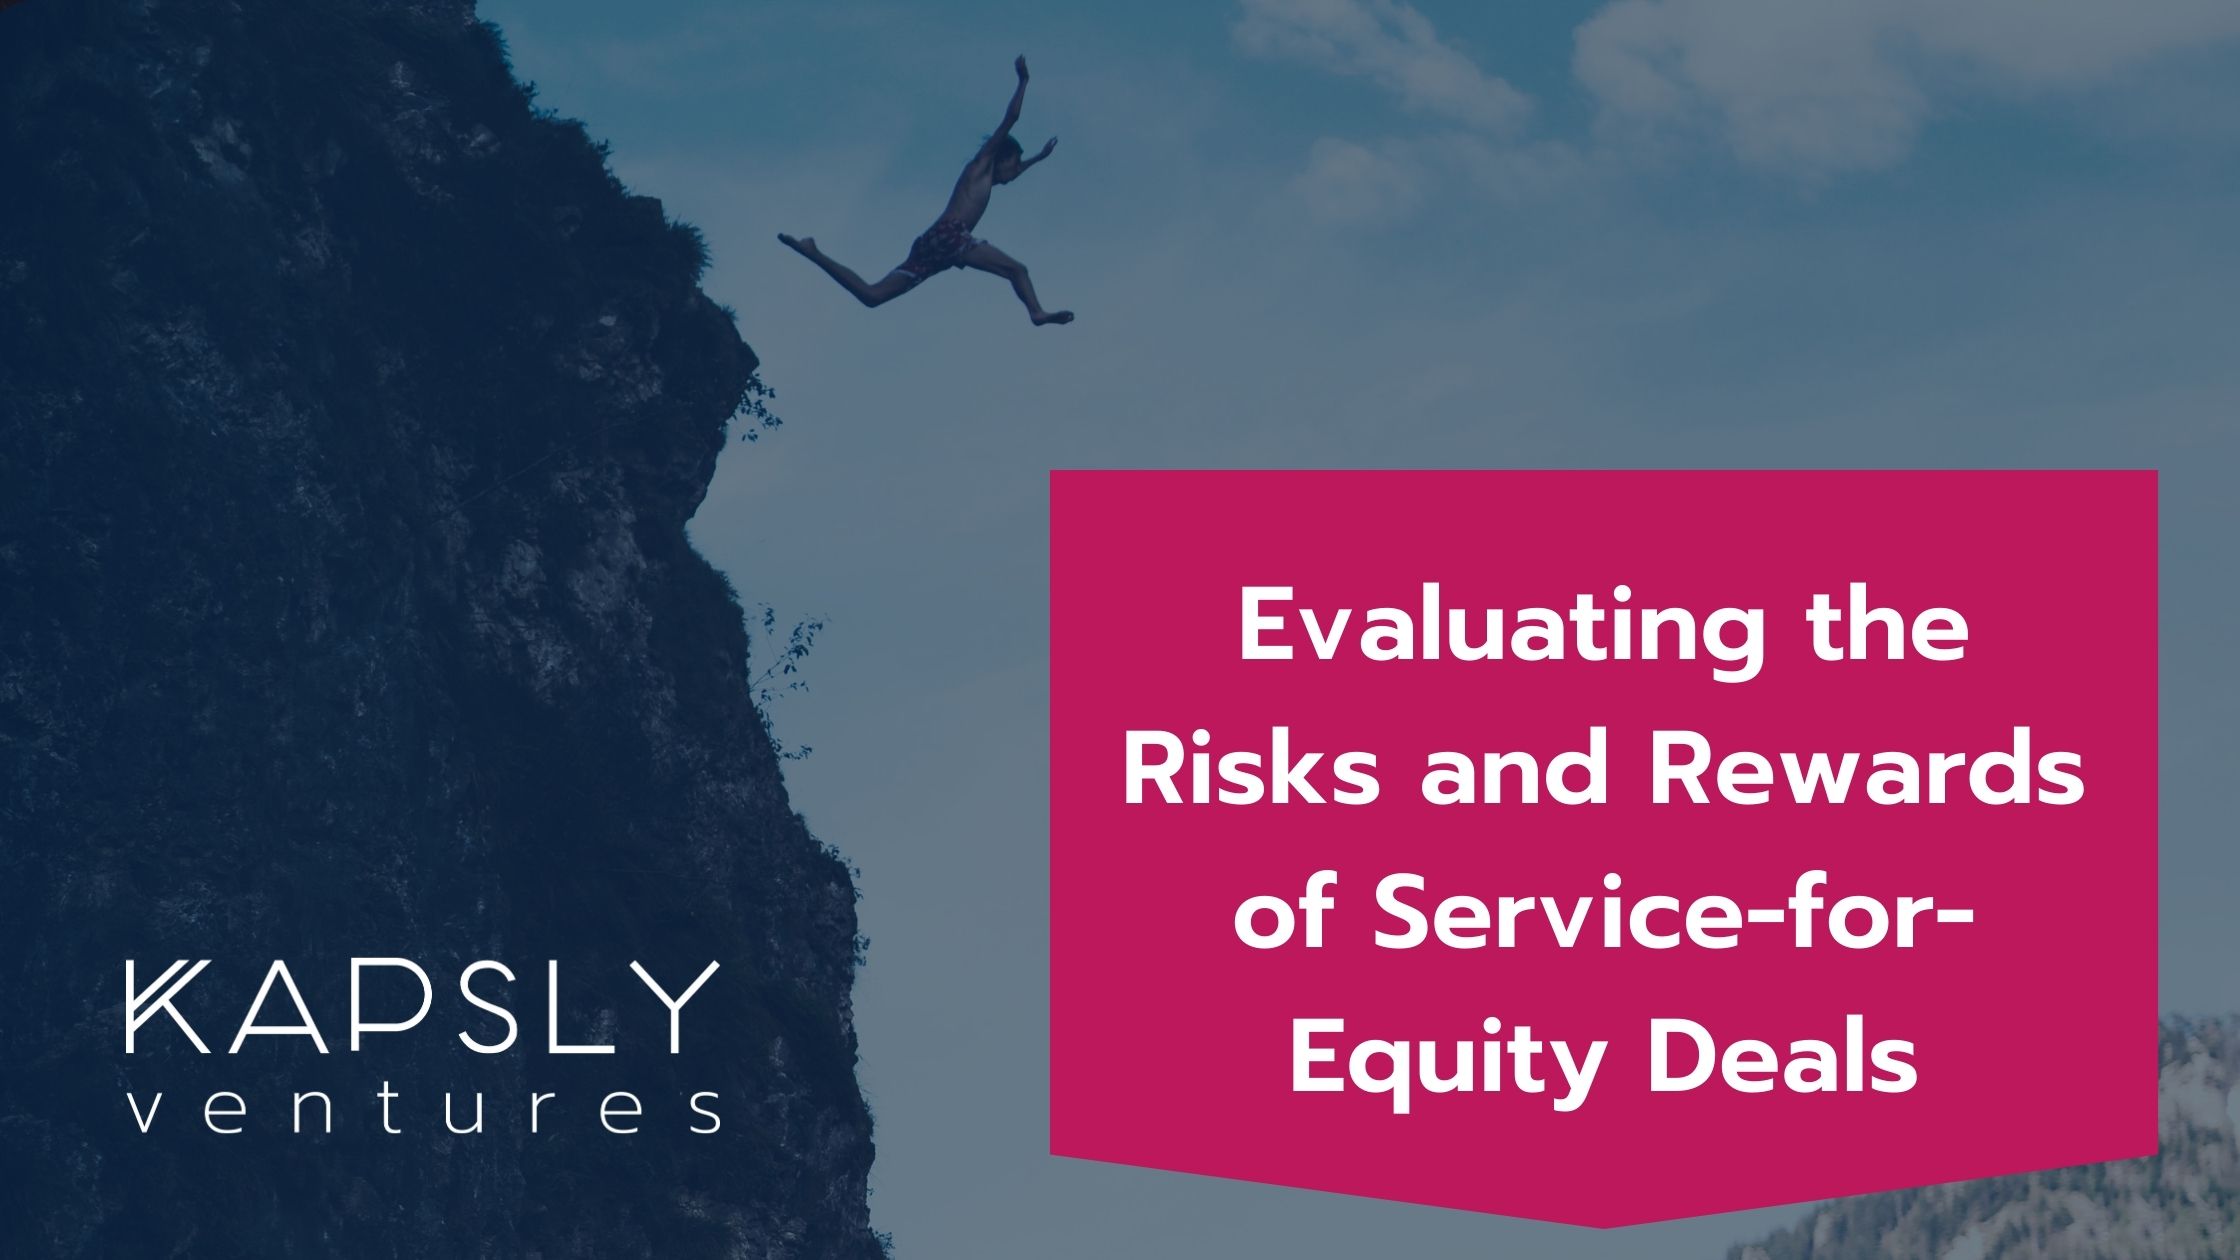 Evaluating the Risks and Rewards of Service-for-Equity Deals